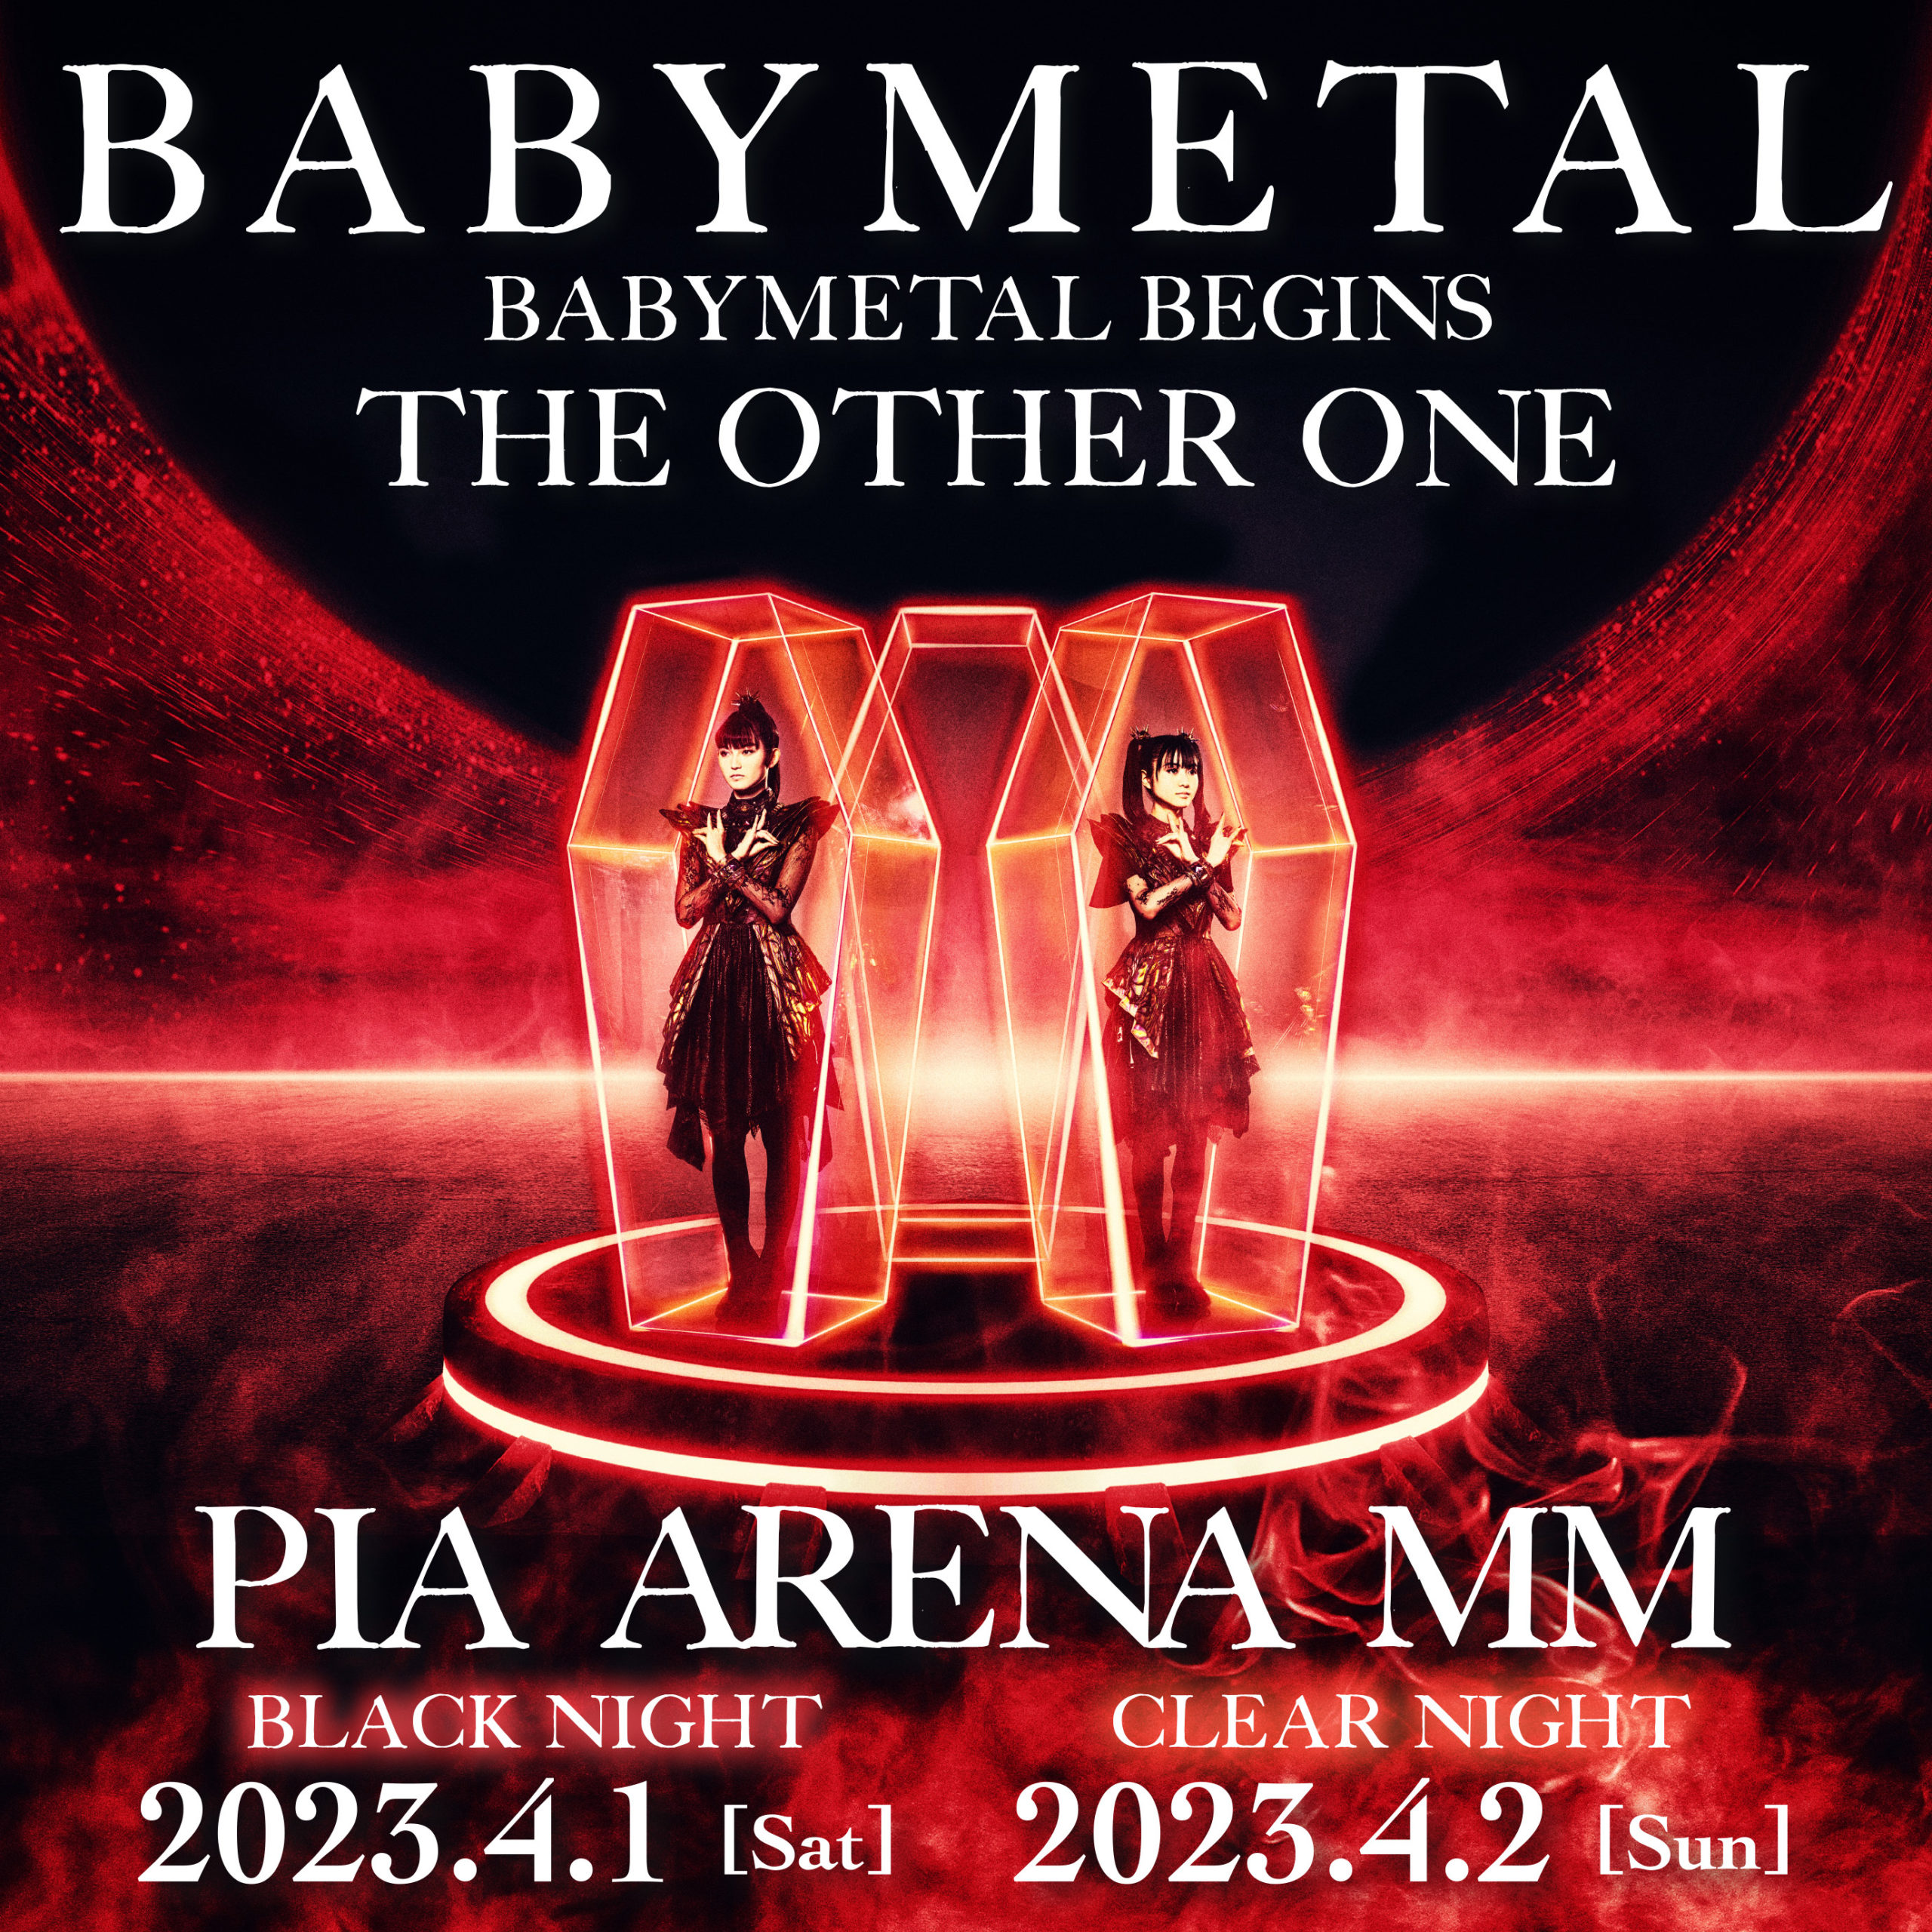 “BABYMETAL BEGINS THE OTHER ONE “ Live Shows Announced For FOX DAY